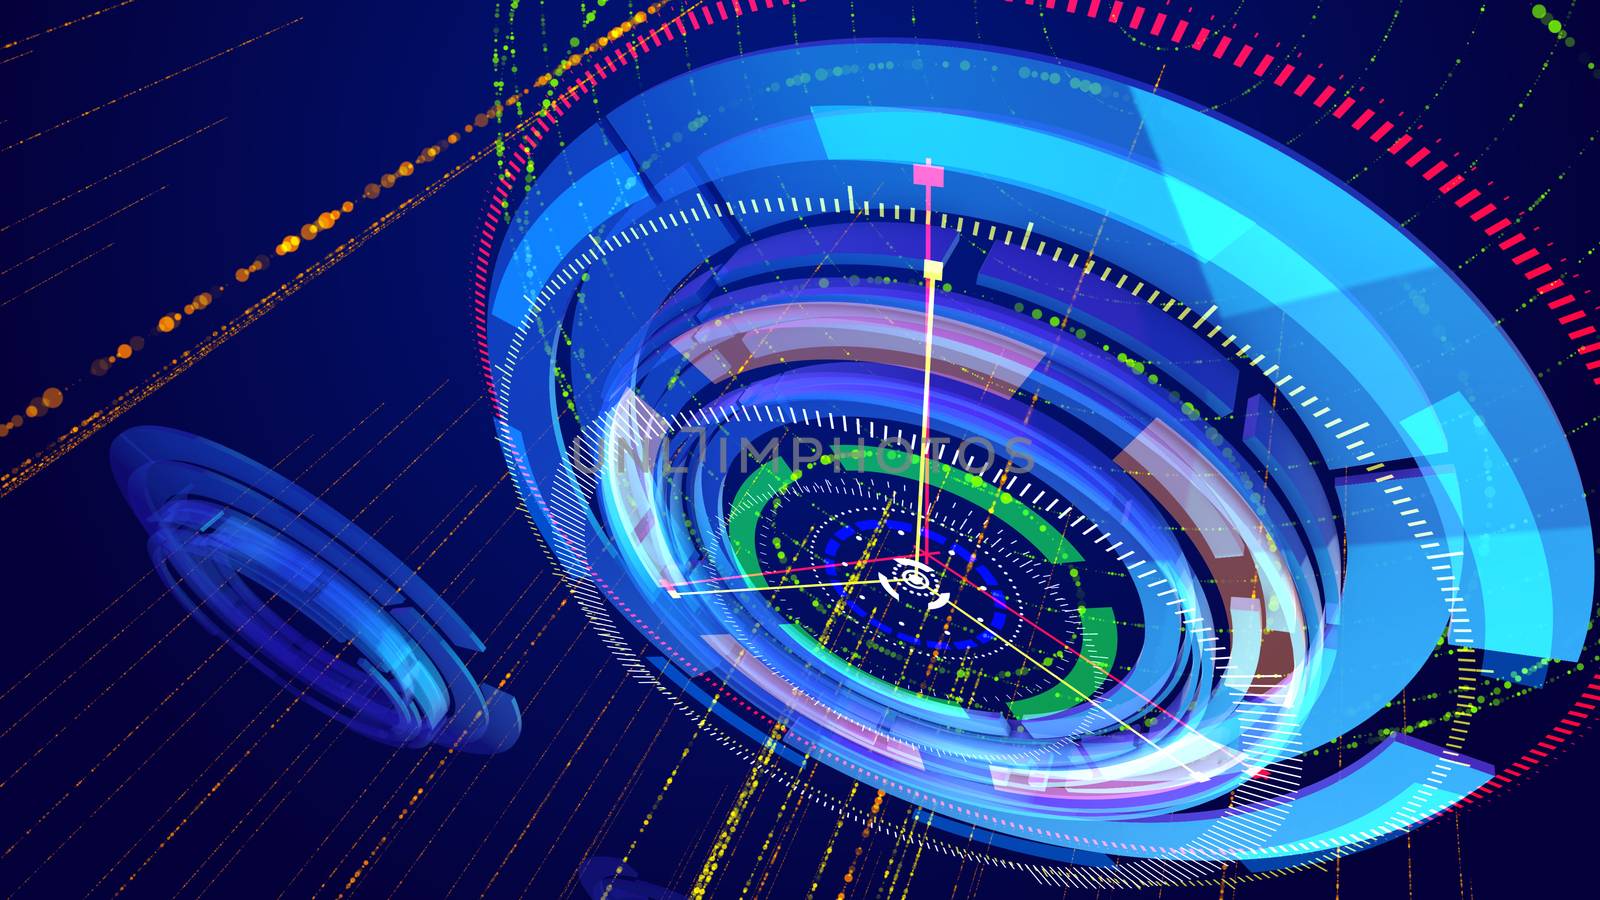 Cyber cosmos 3d illustration of dazzling blue and celeste circles rotating oppositely and having a compass dial face put aslant and thin arrows whirling too in the blue background.